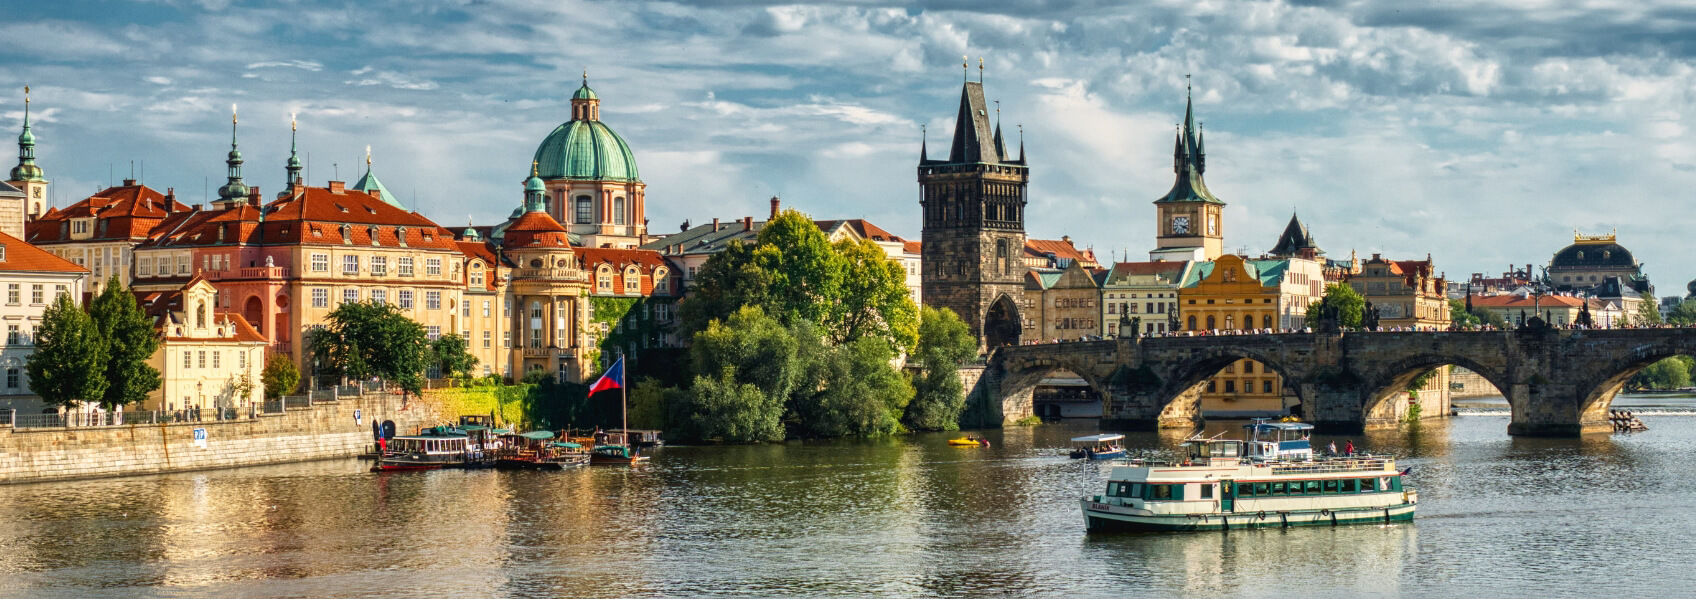 Where to go in Prague and its surroundings? 28 trip ideas